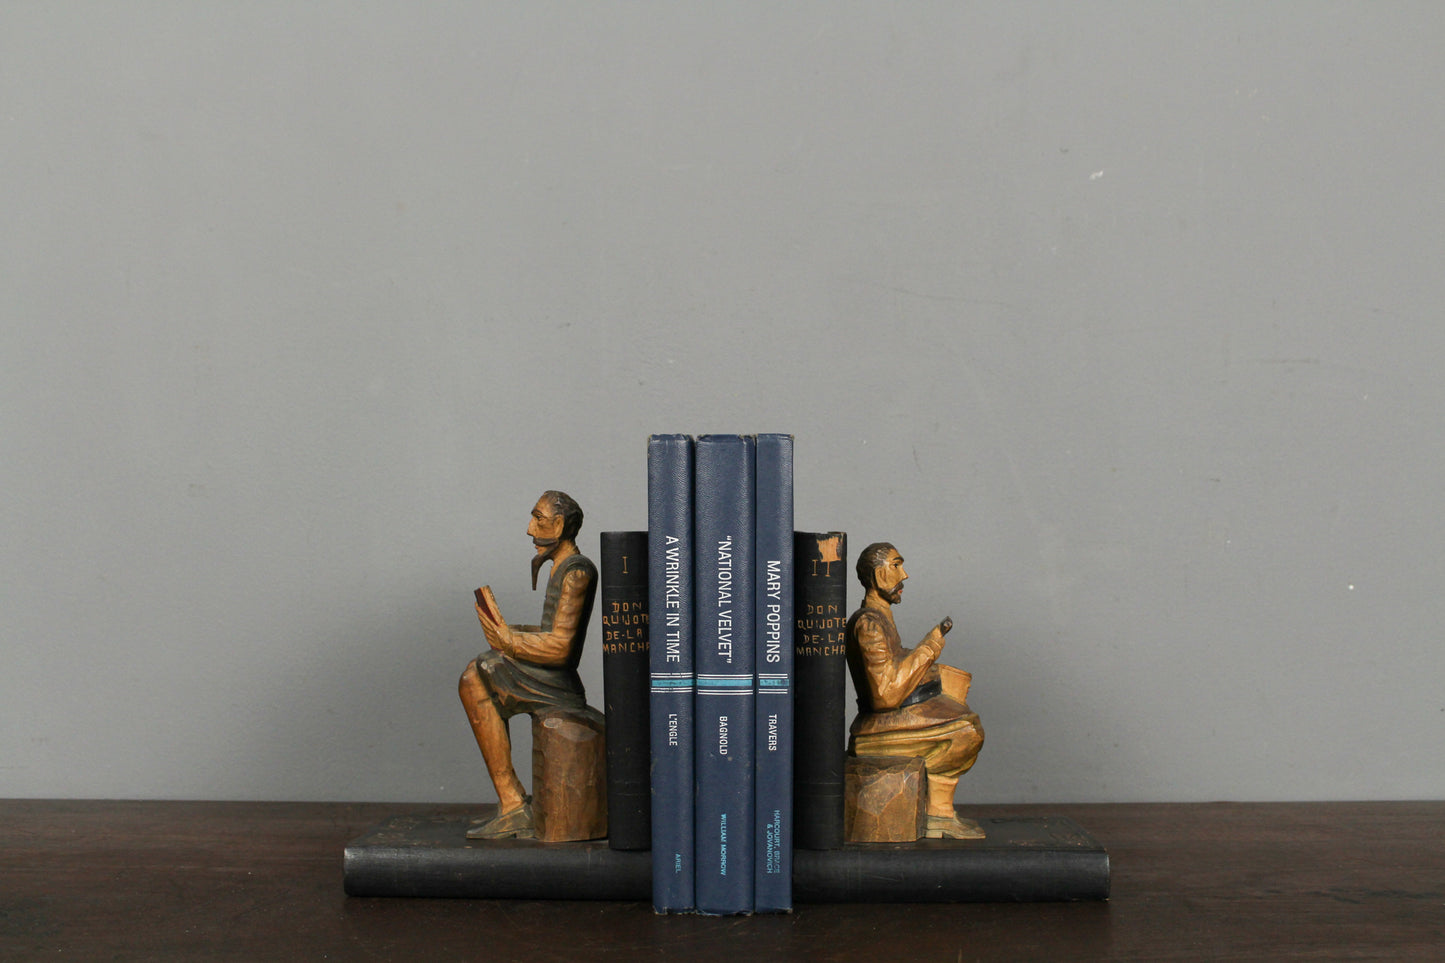 Pair Of Carved Don Quijote Bookends